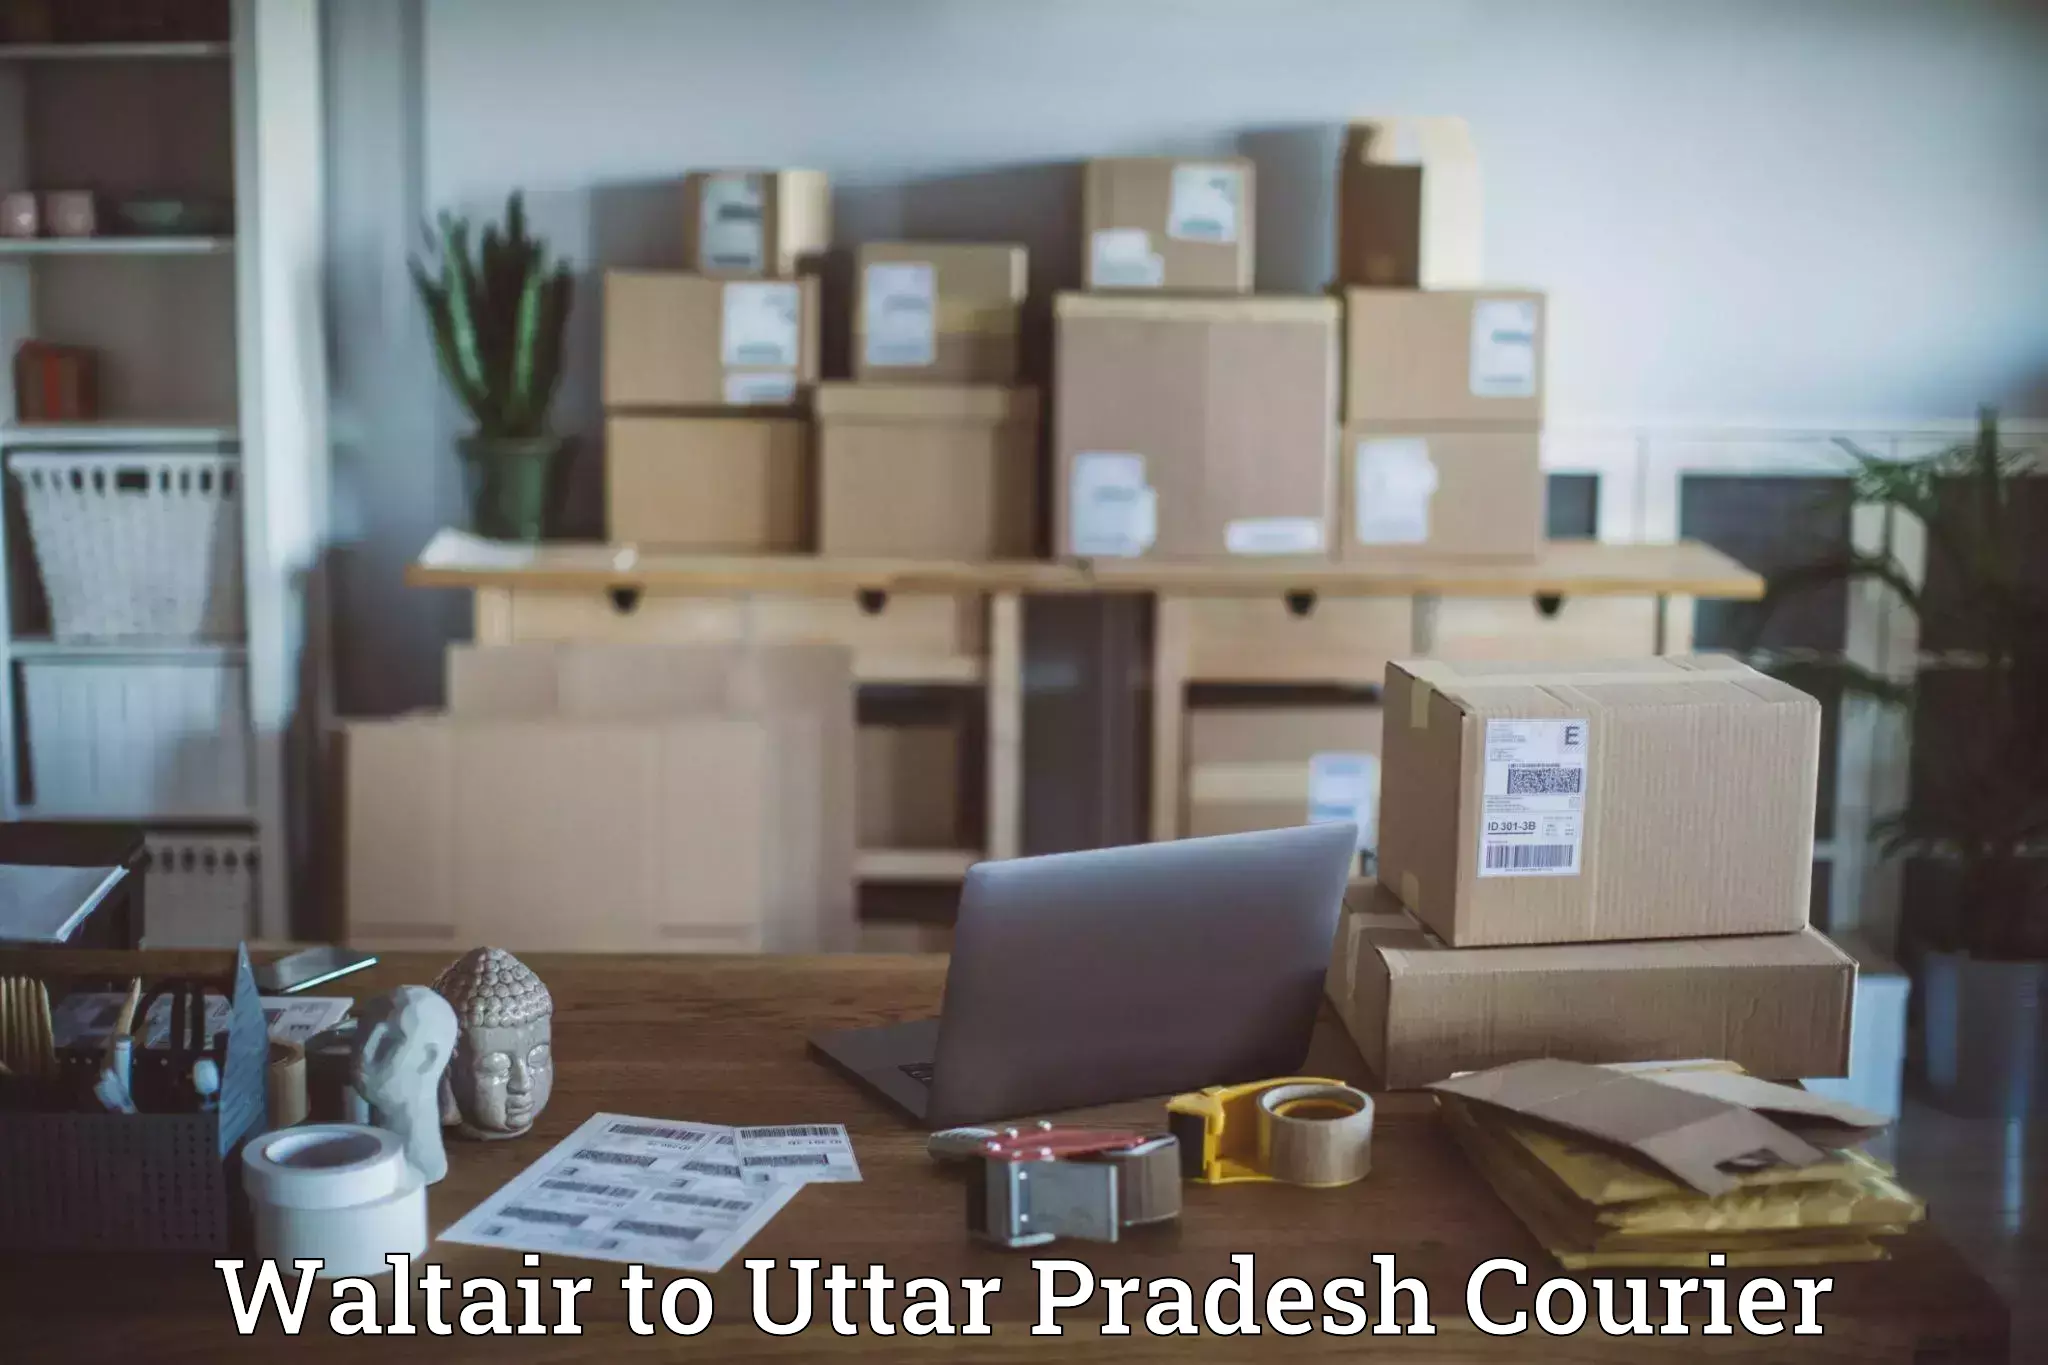 Residential courier service Waltair to Anpara